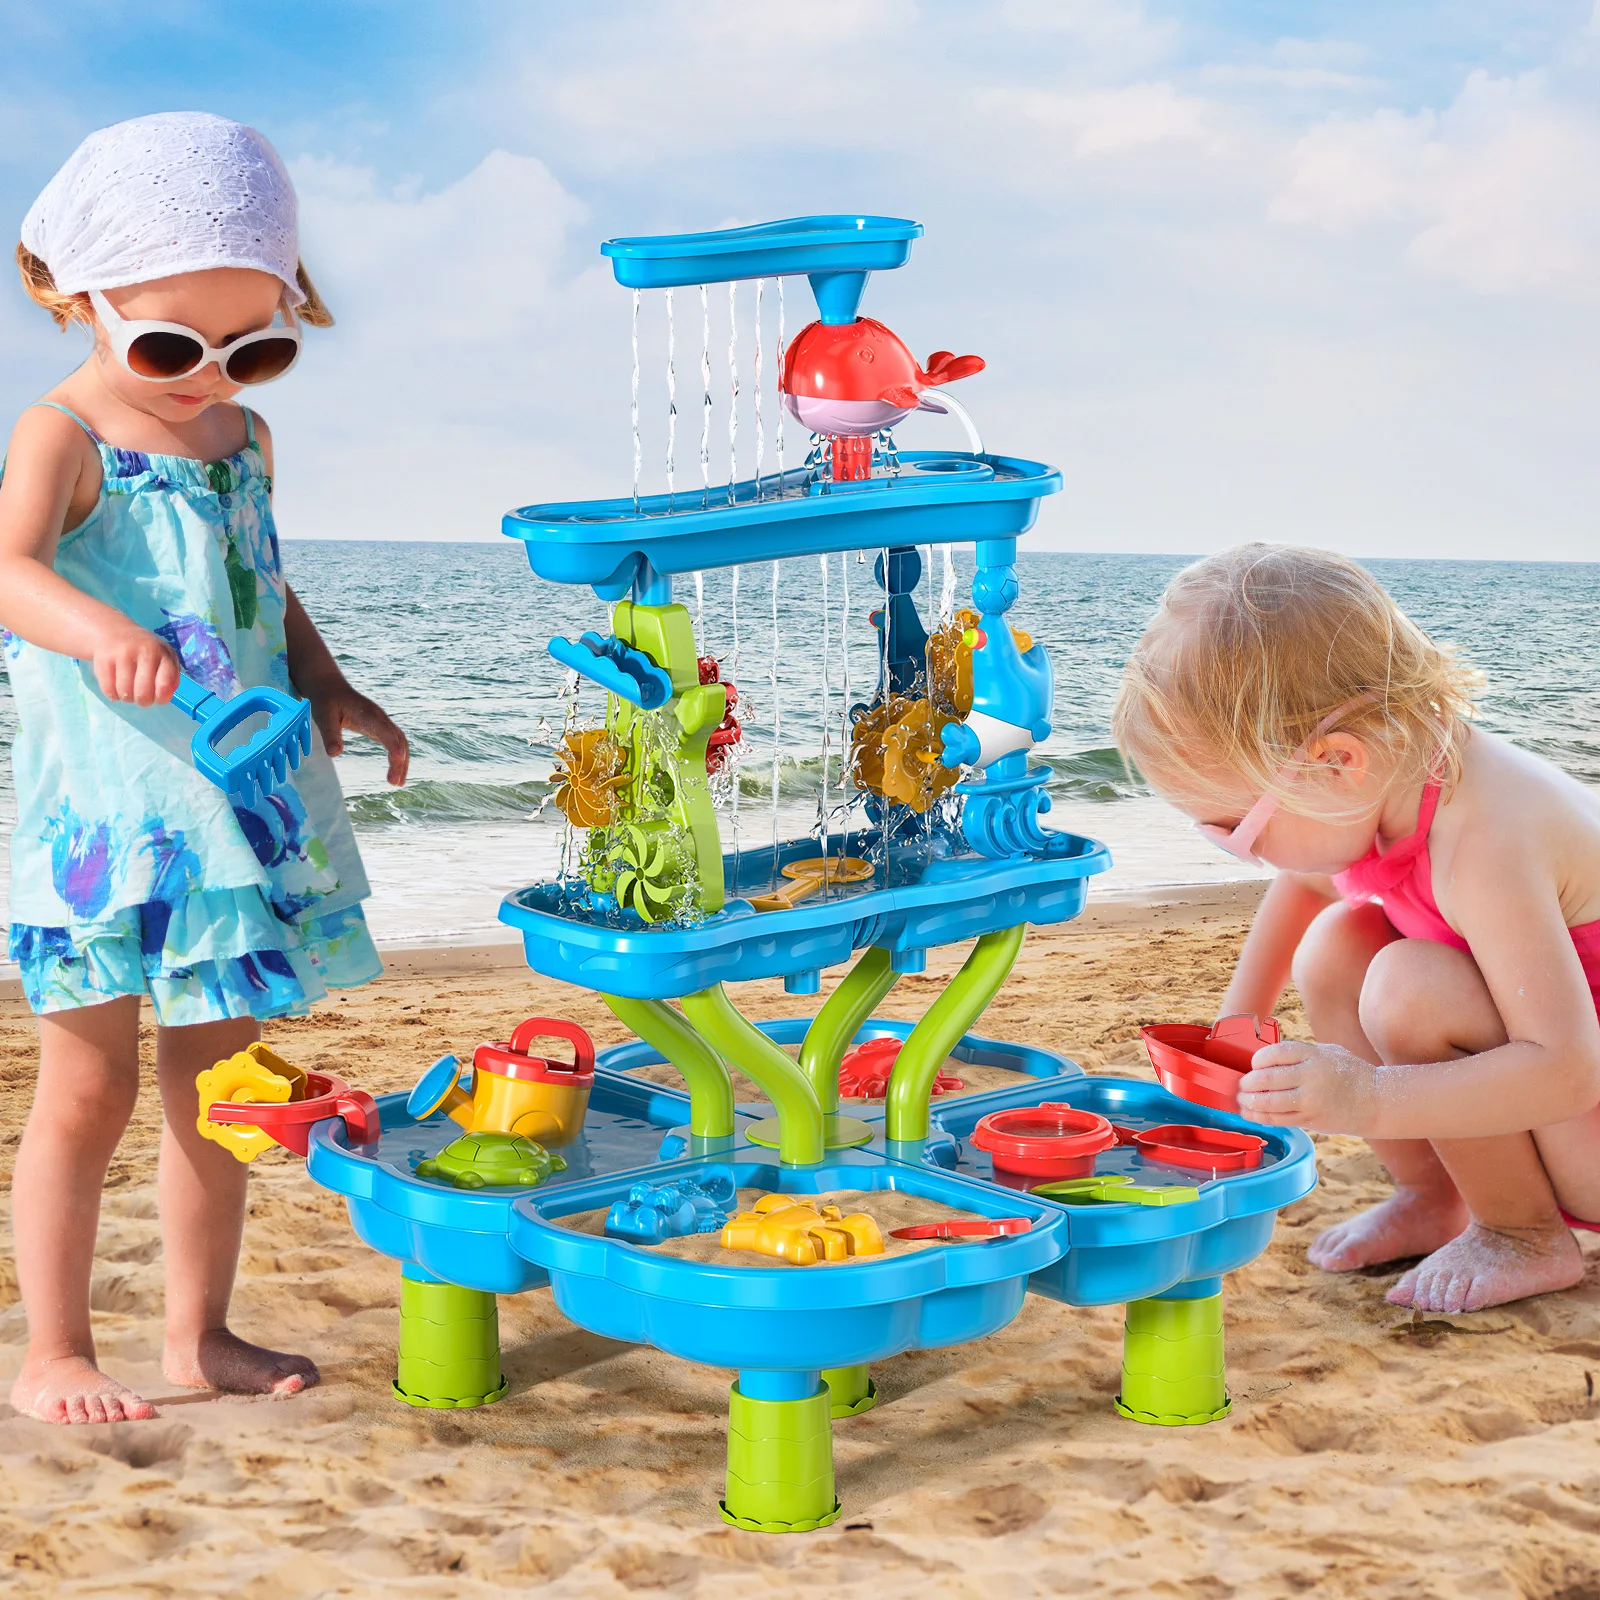 

Kids Sand Water Table Toys for, 4-Tier 4-in-1 Splash Table, Water Sand Activity Tables Summer Outdoor Toys for Outside Backyard